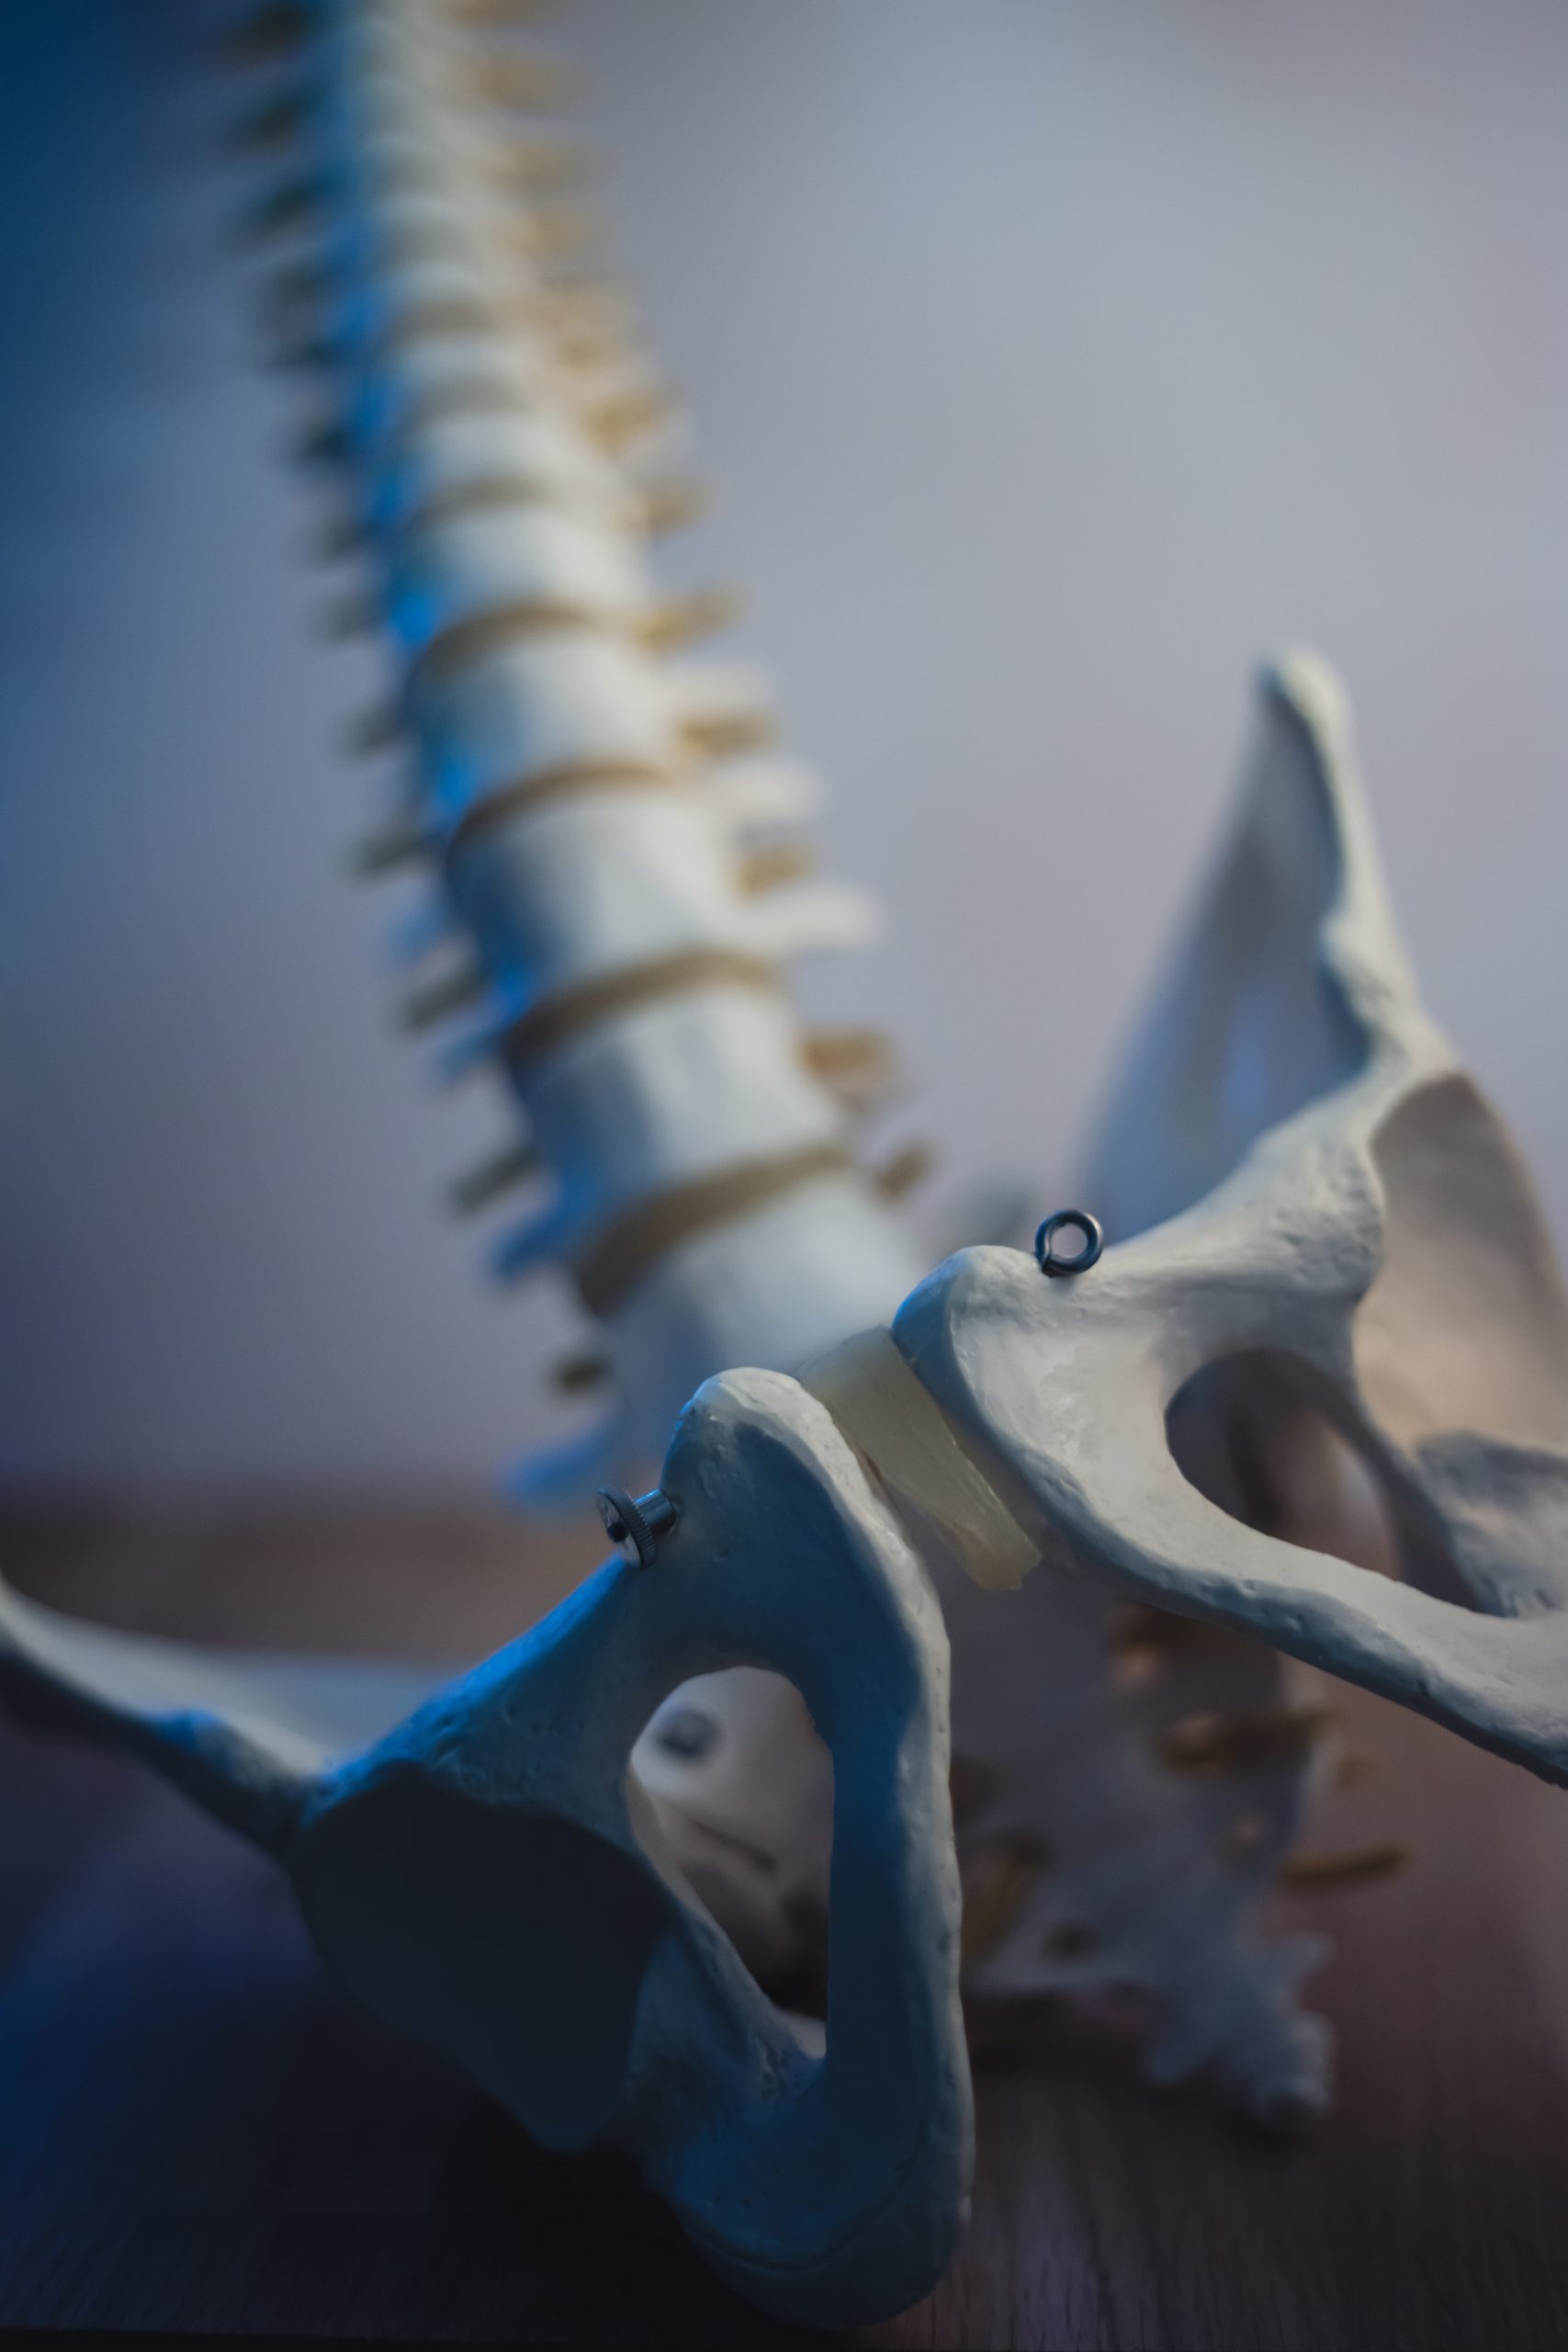 Tailbone Pain- Could It Be The Coccygeus? — Flow Rehab